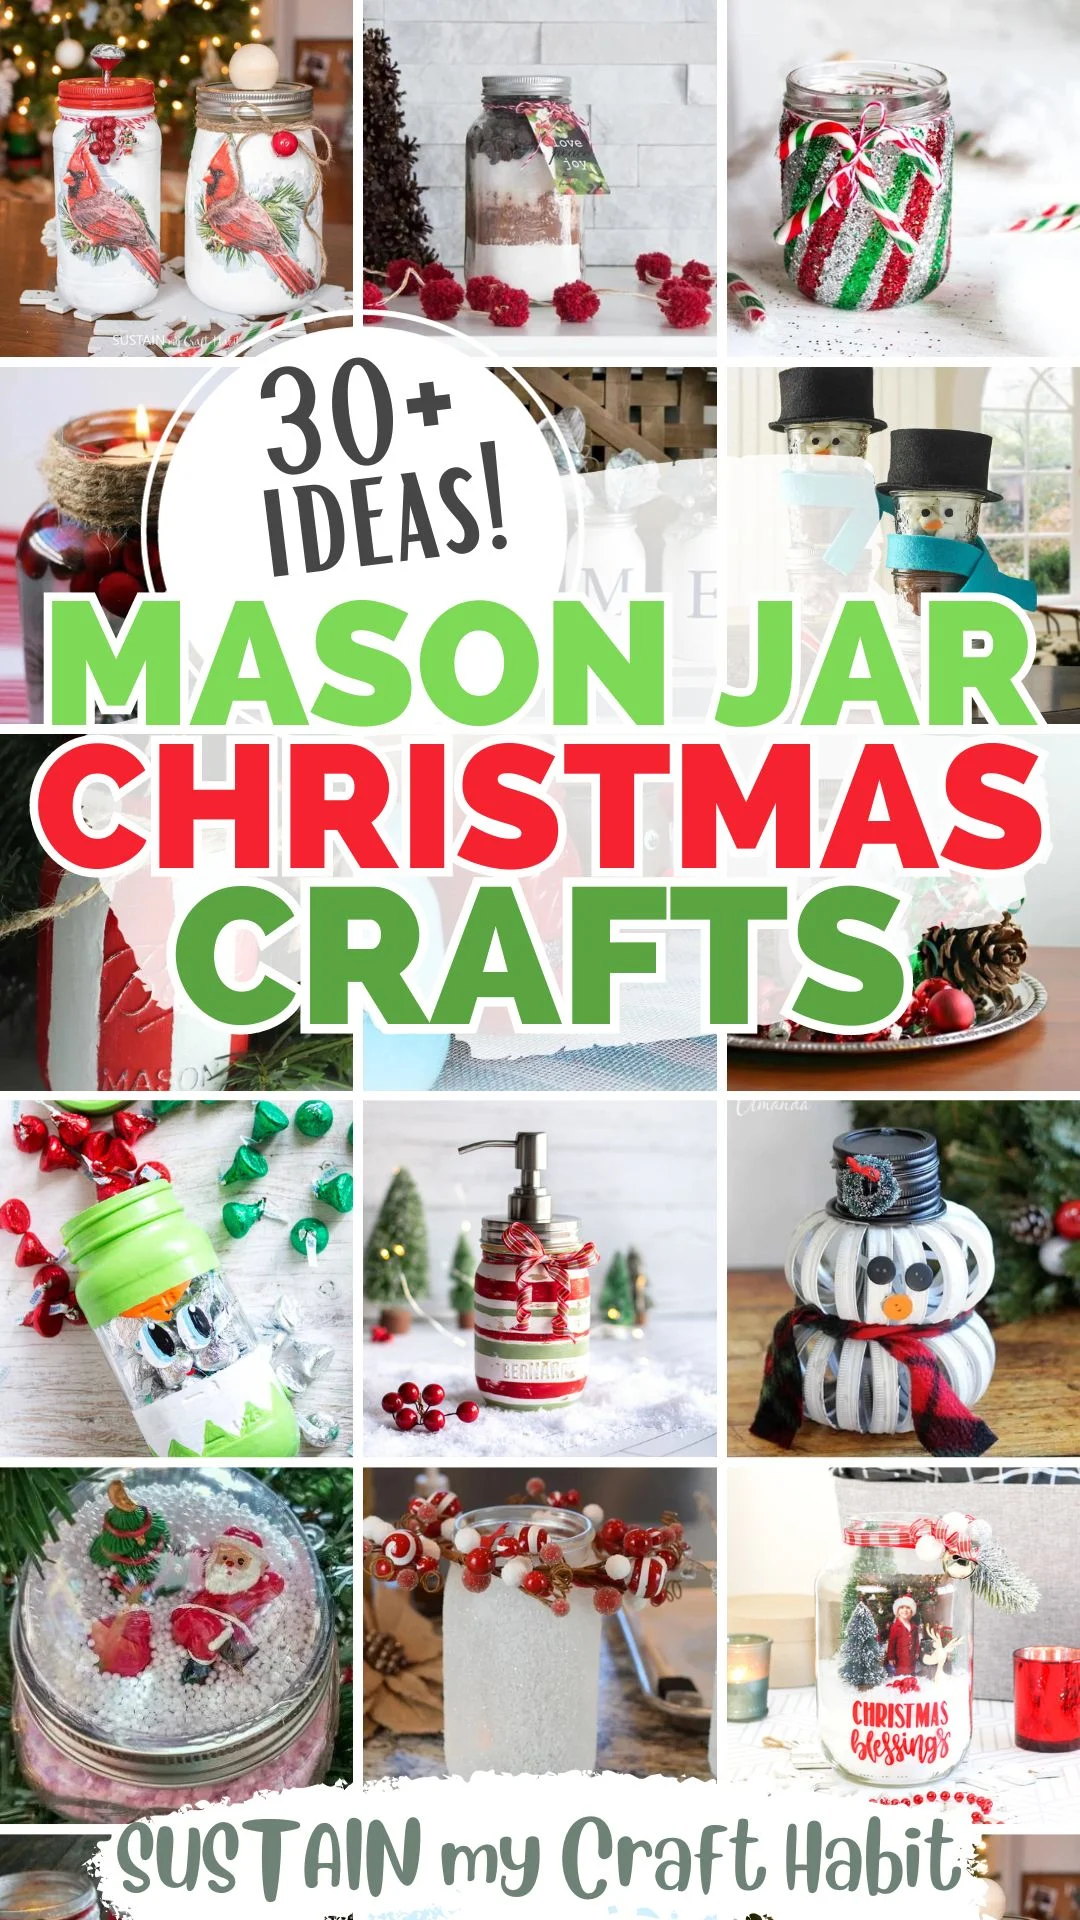 Collage of images showing completed Mason Jar Christmas crafts.